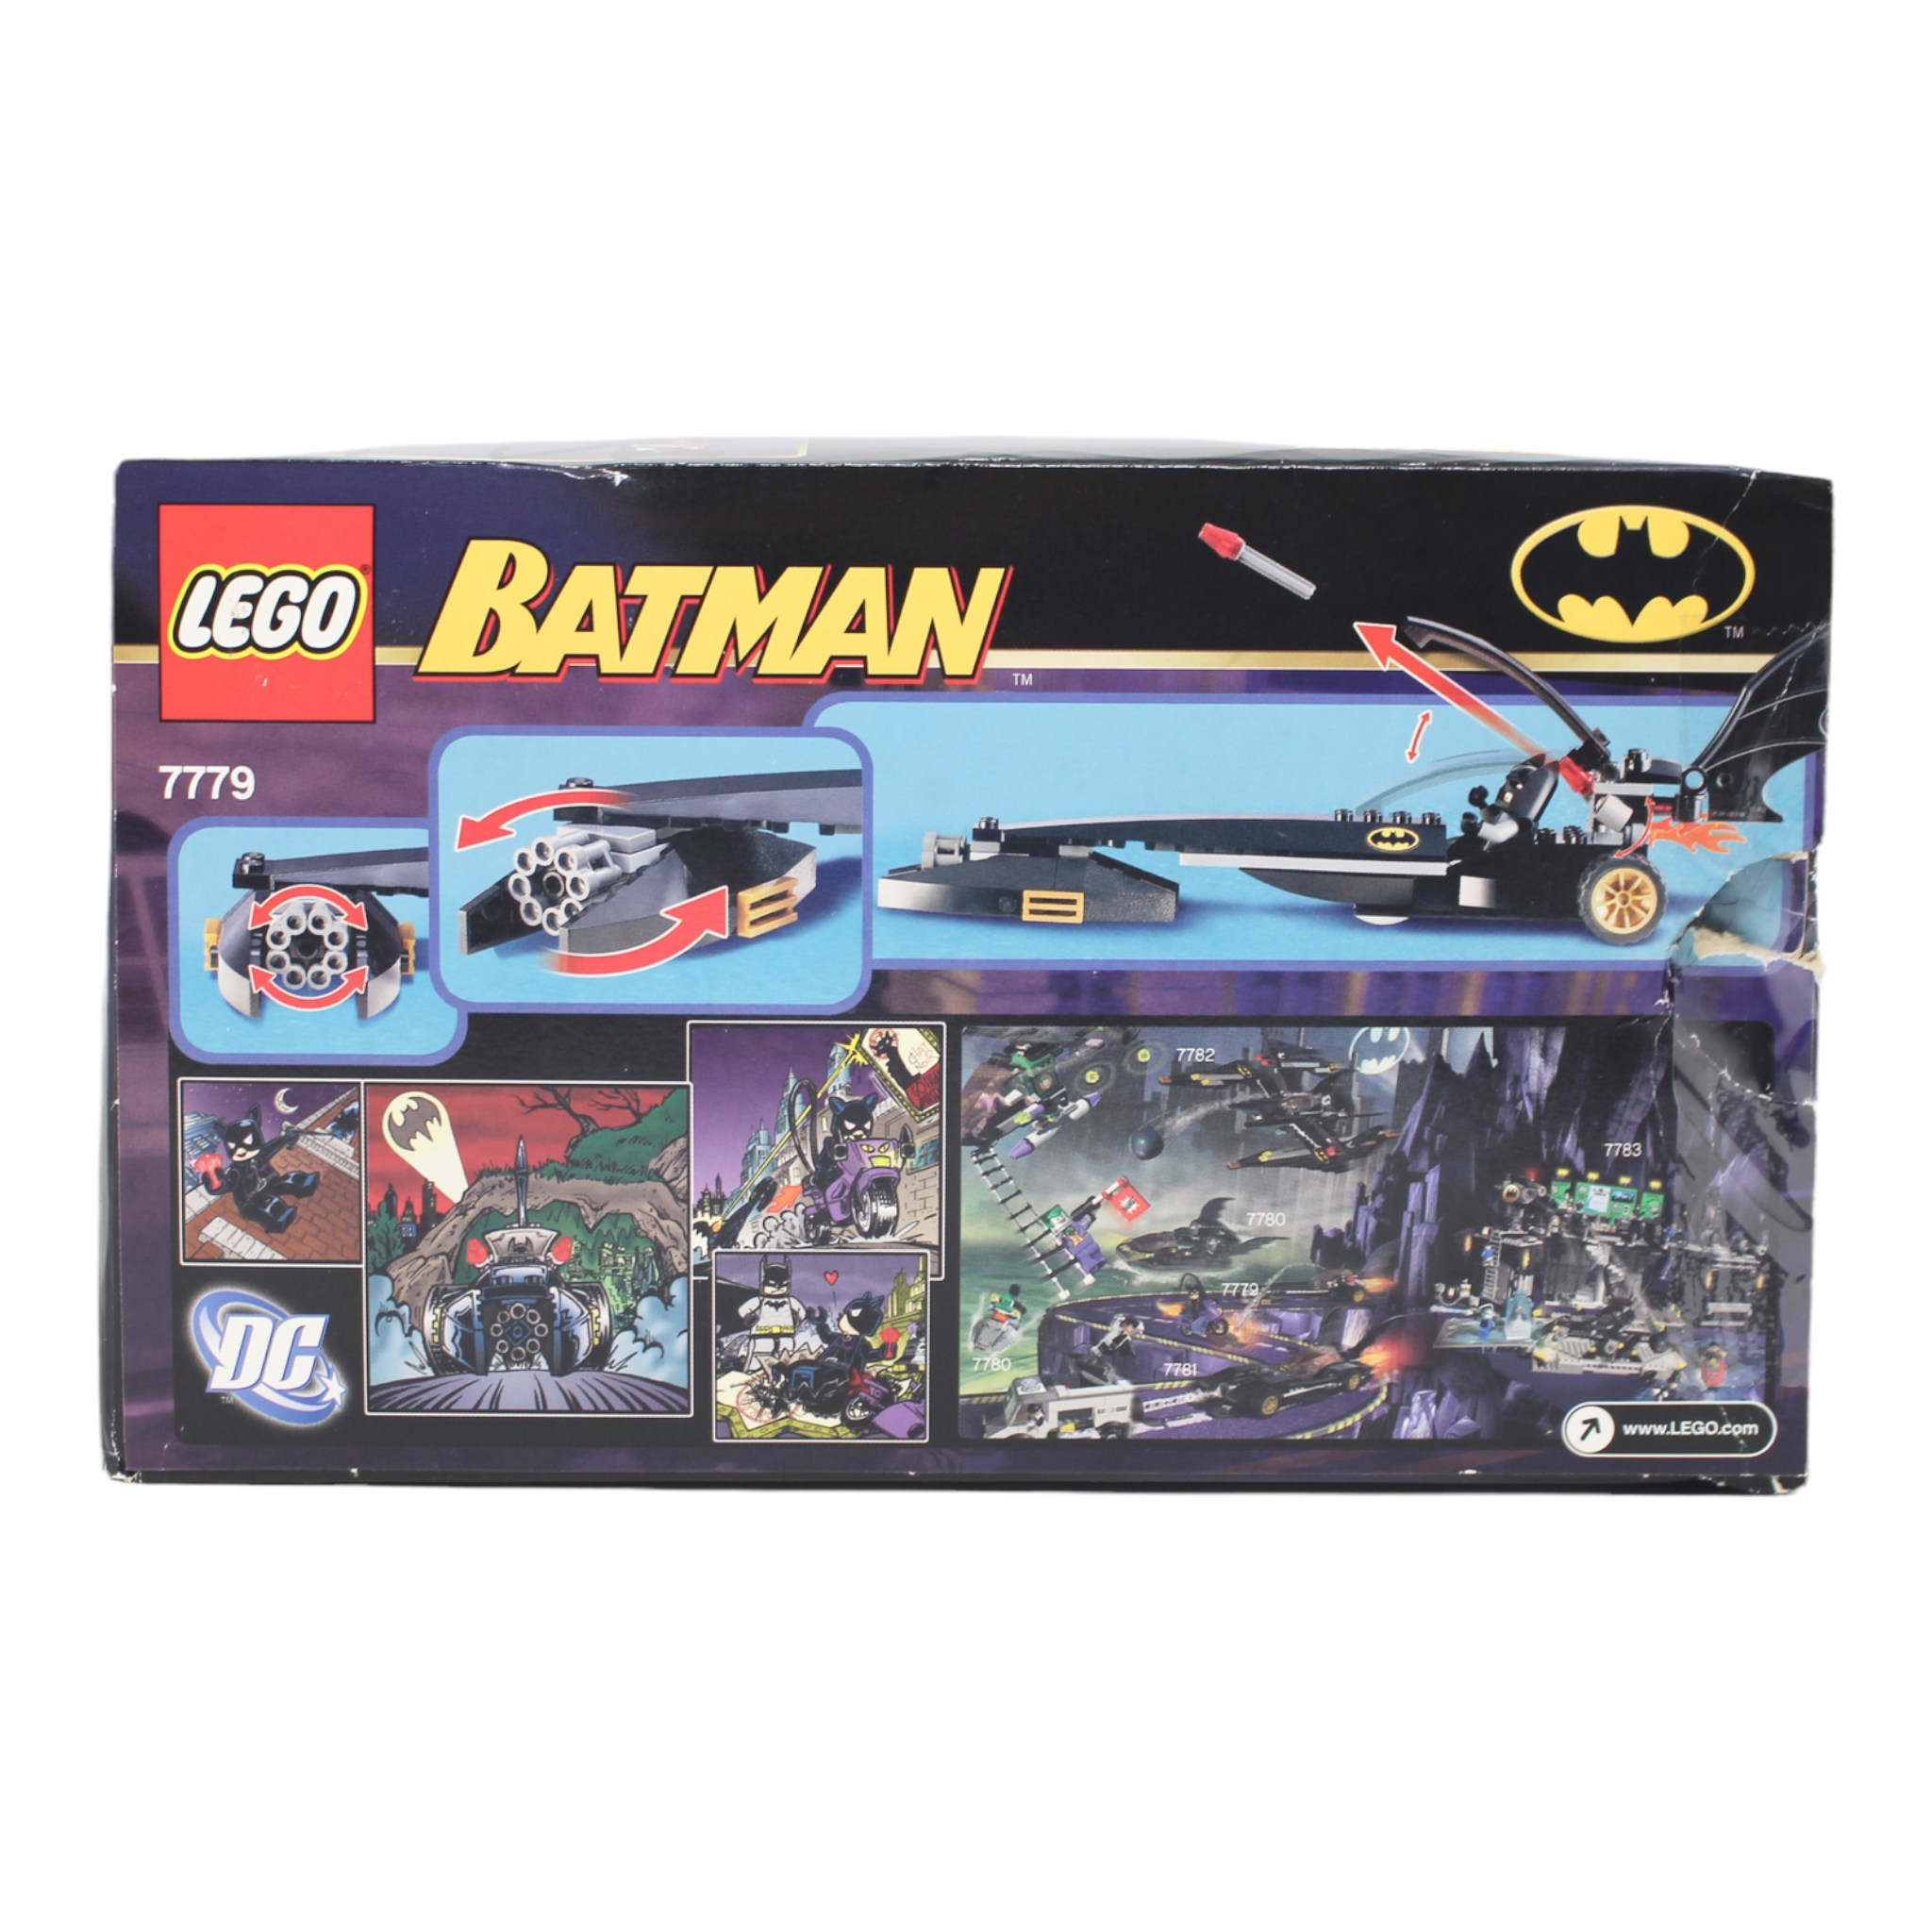 Certified Used Set 7779 The Batman Dragster: Catwoman Pursuit